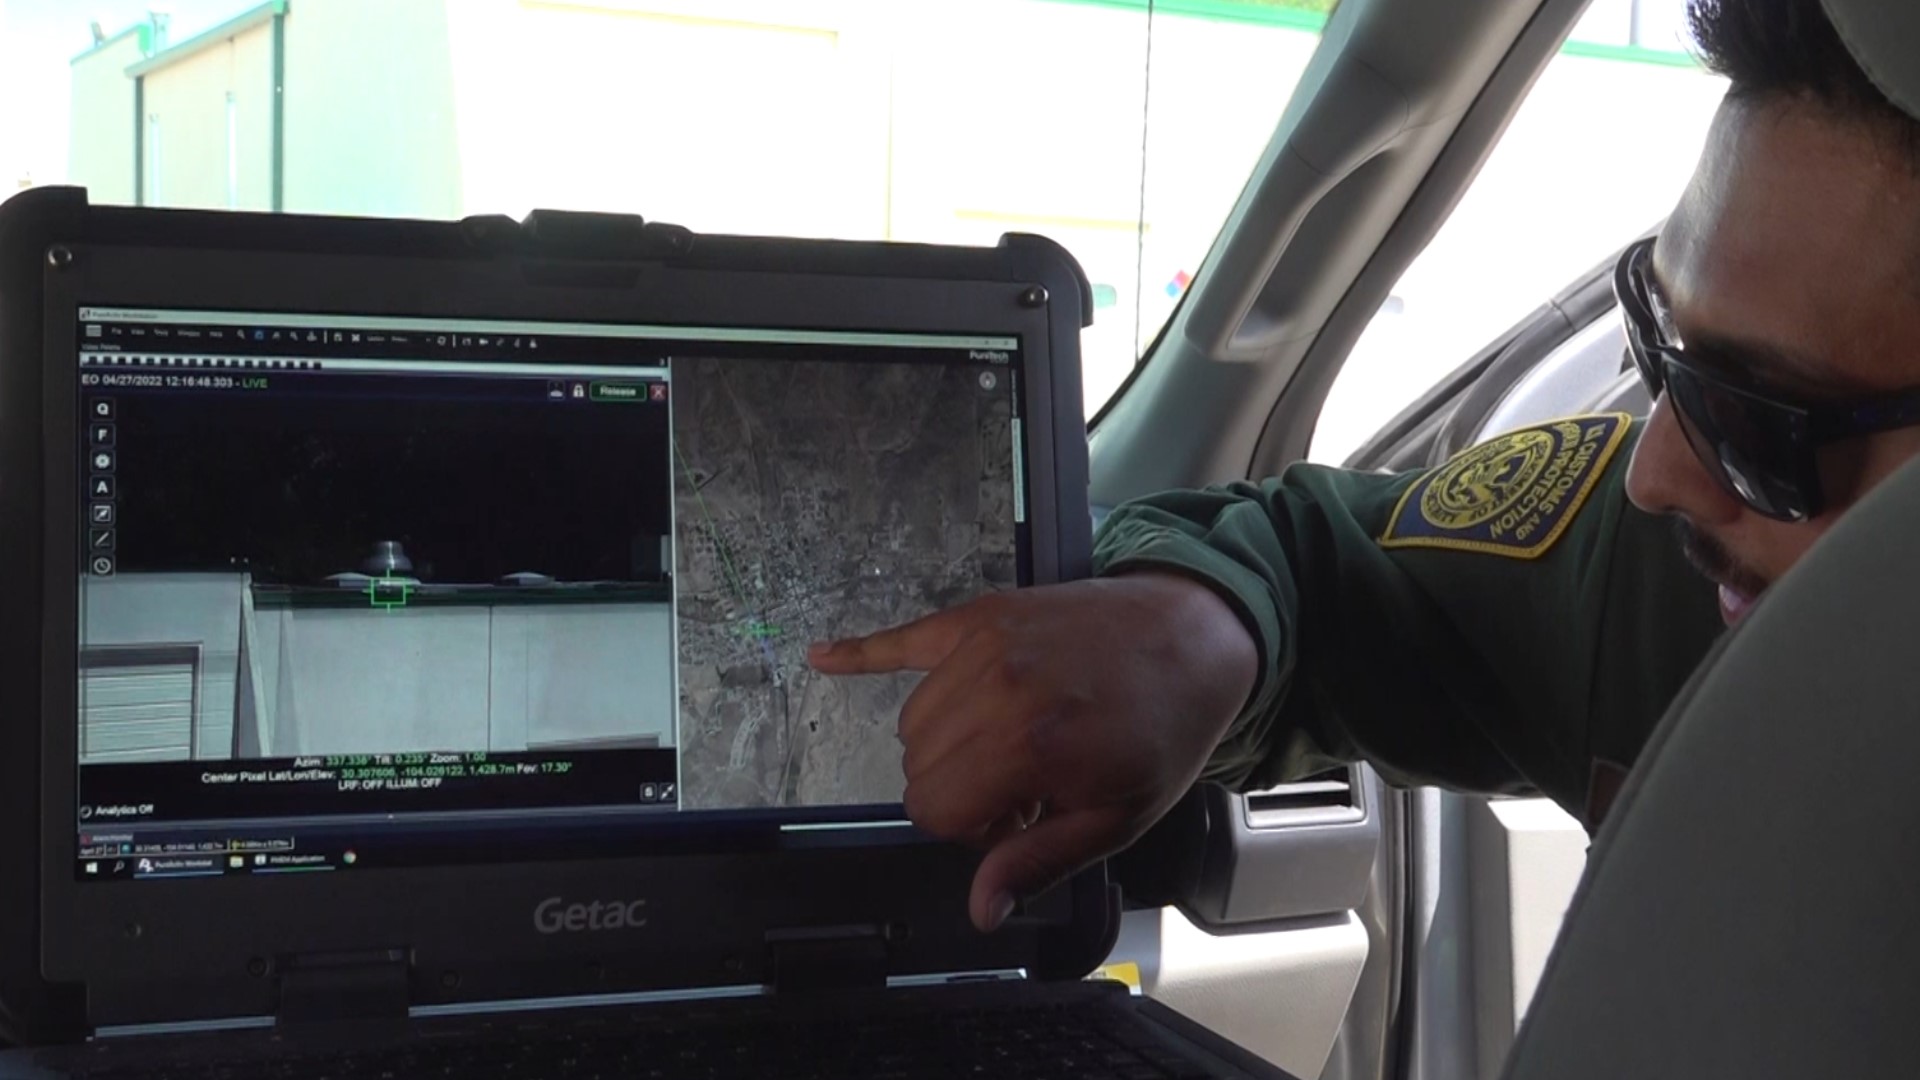 Border patrol utilizes everything from technology, to distress beacons, to horses and dogs to keep our country secure.